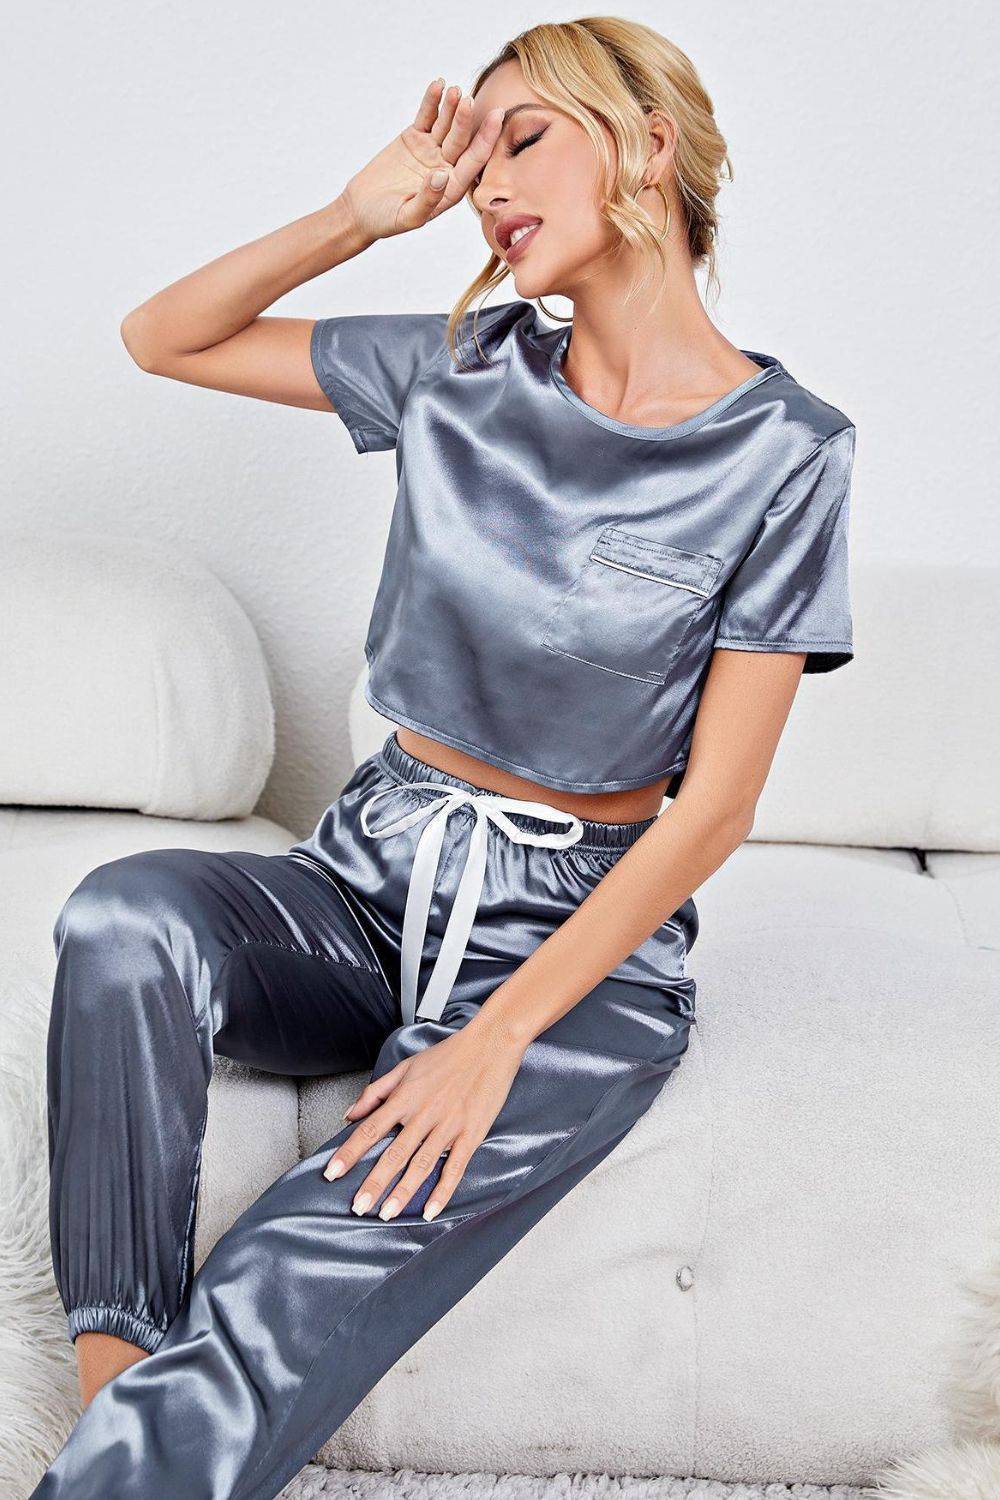 a woman sitting on a couch wearing a silver top and pants